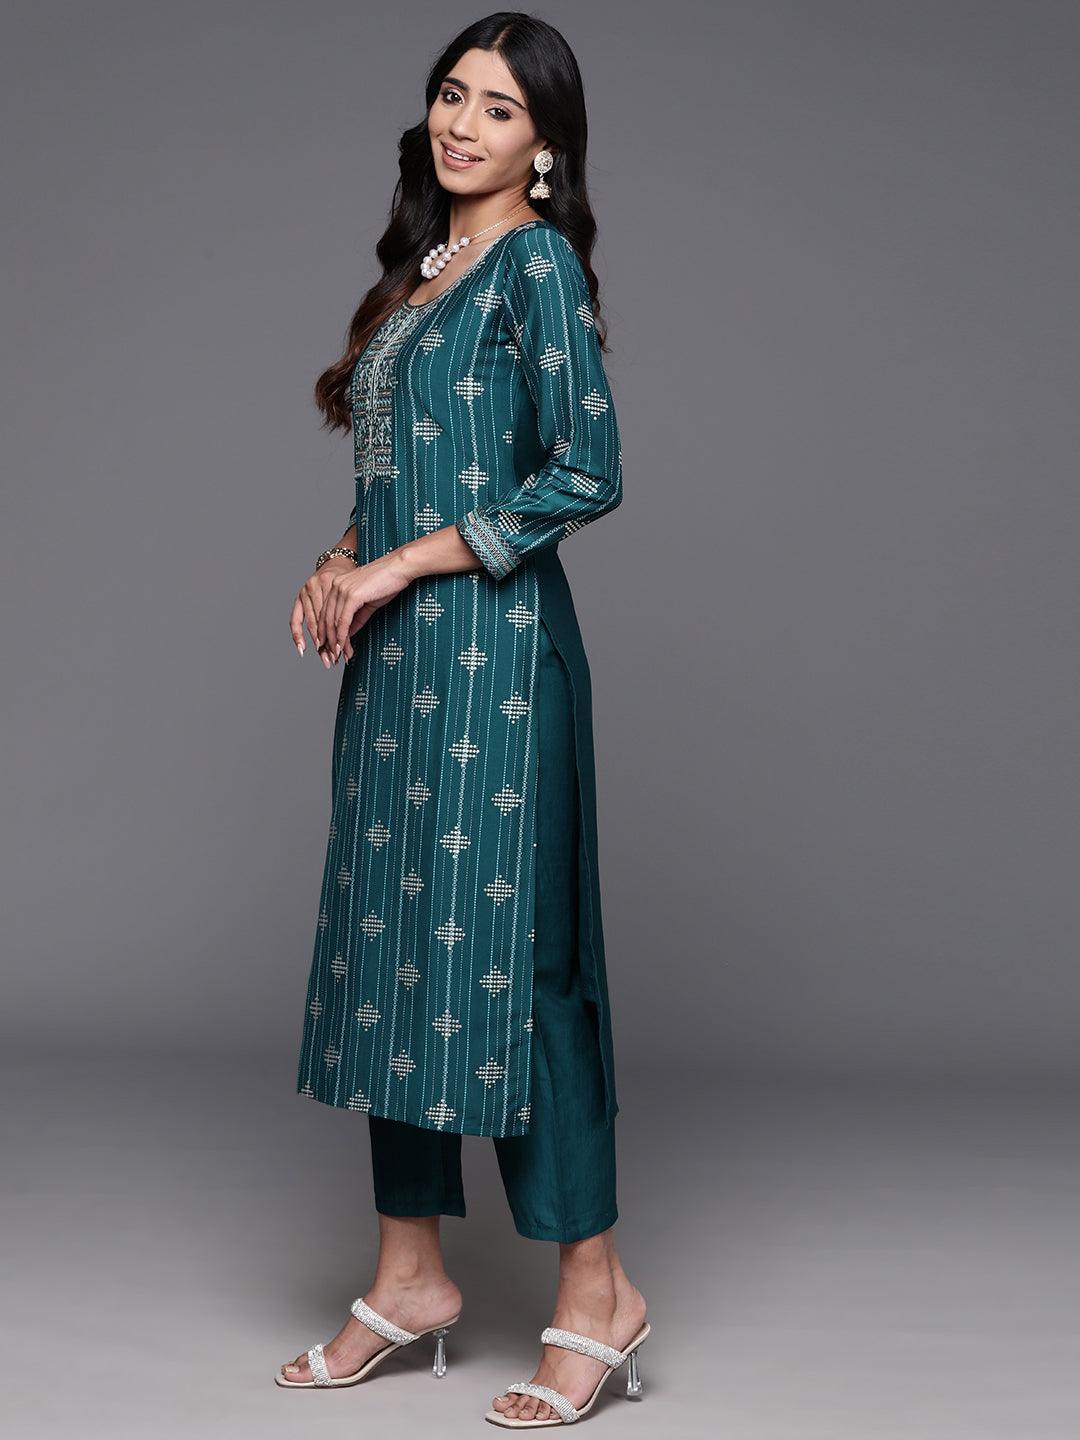 Teal Printed Silk Blend Straight Suit With Dupatta